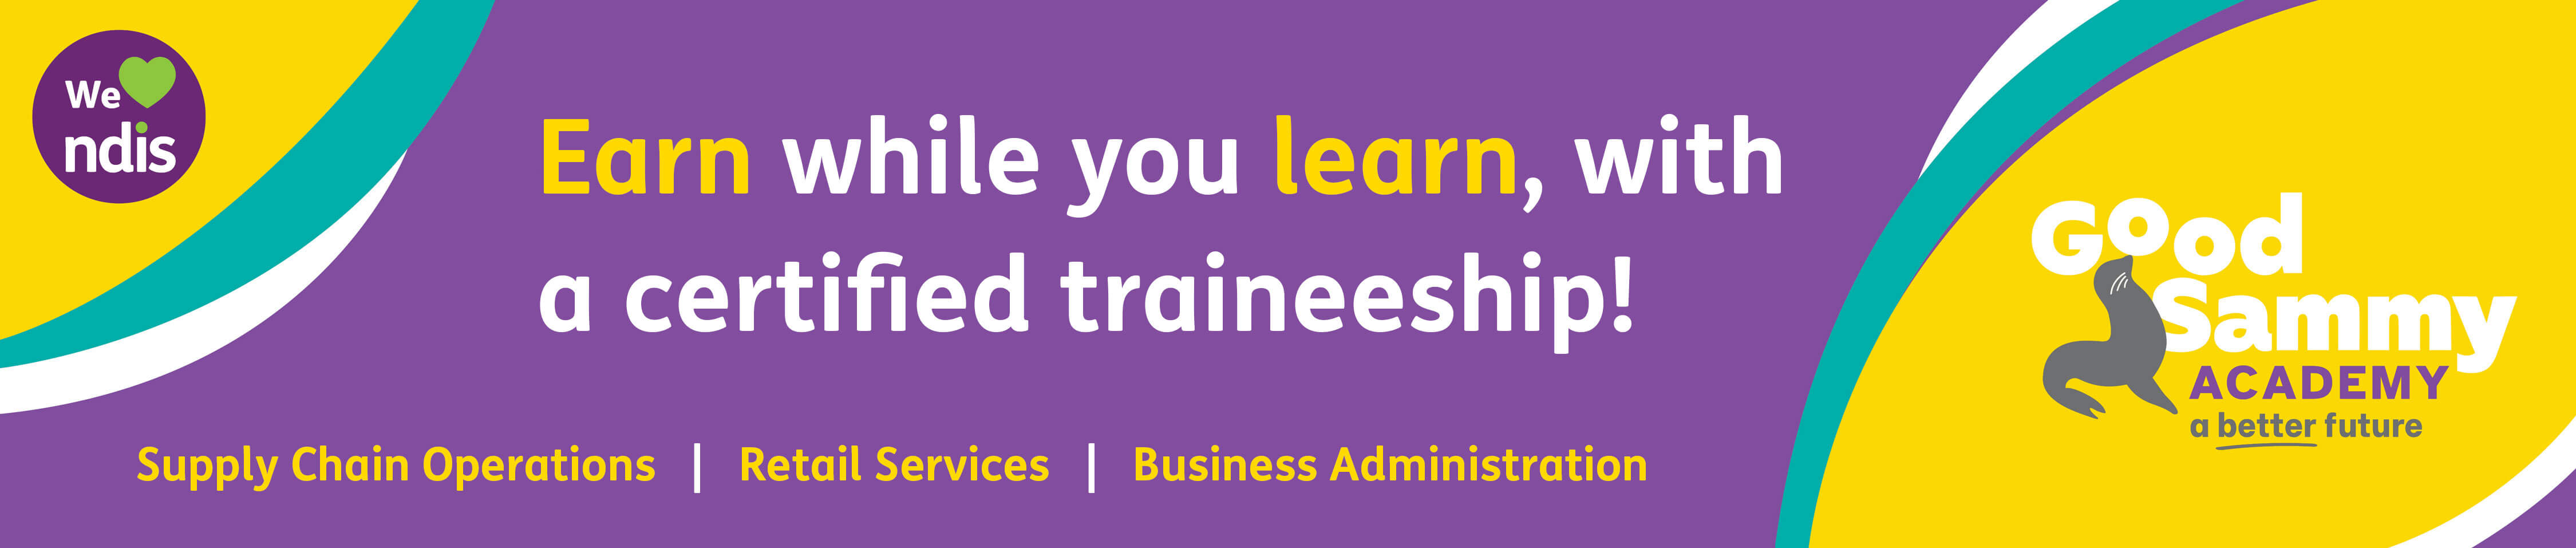 Earn while you learn, with a certified traineeship!